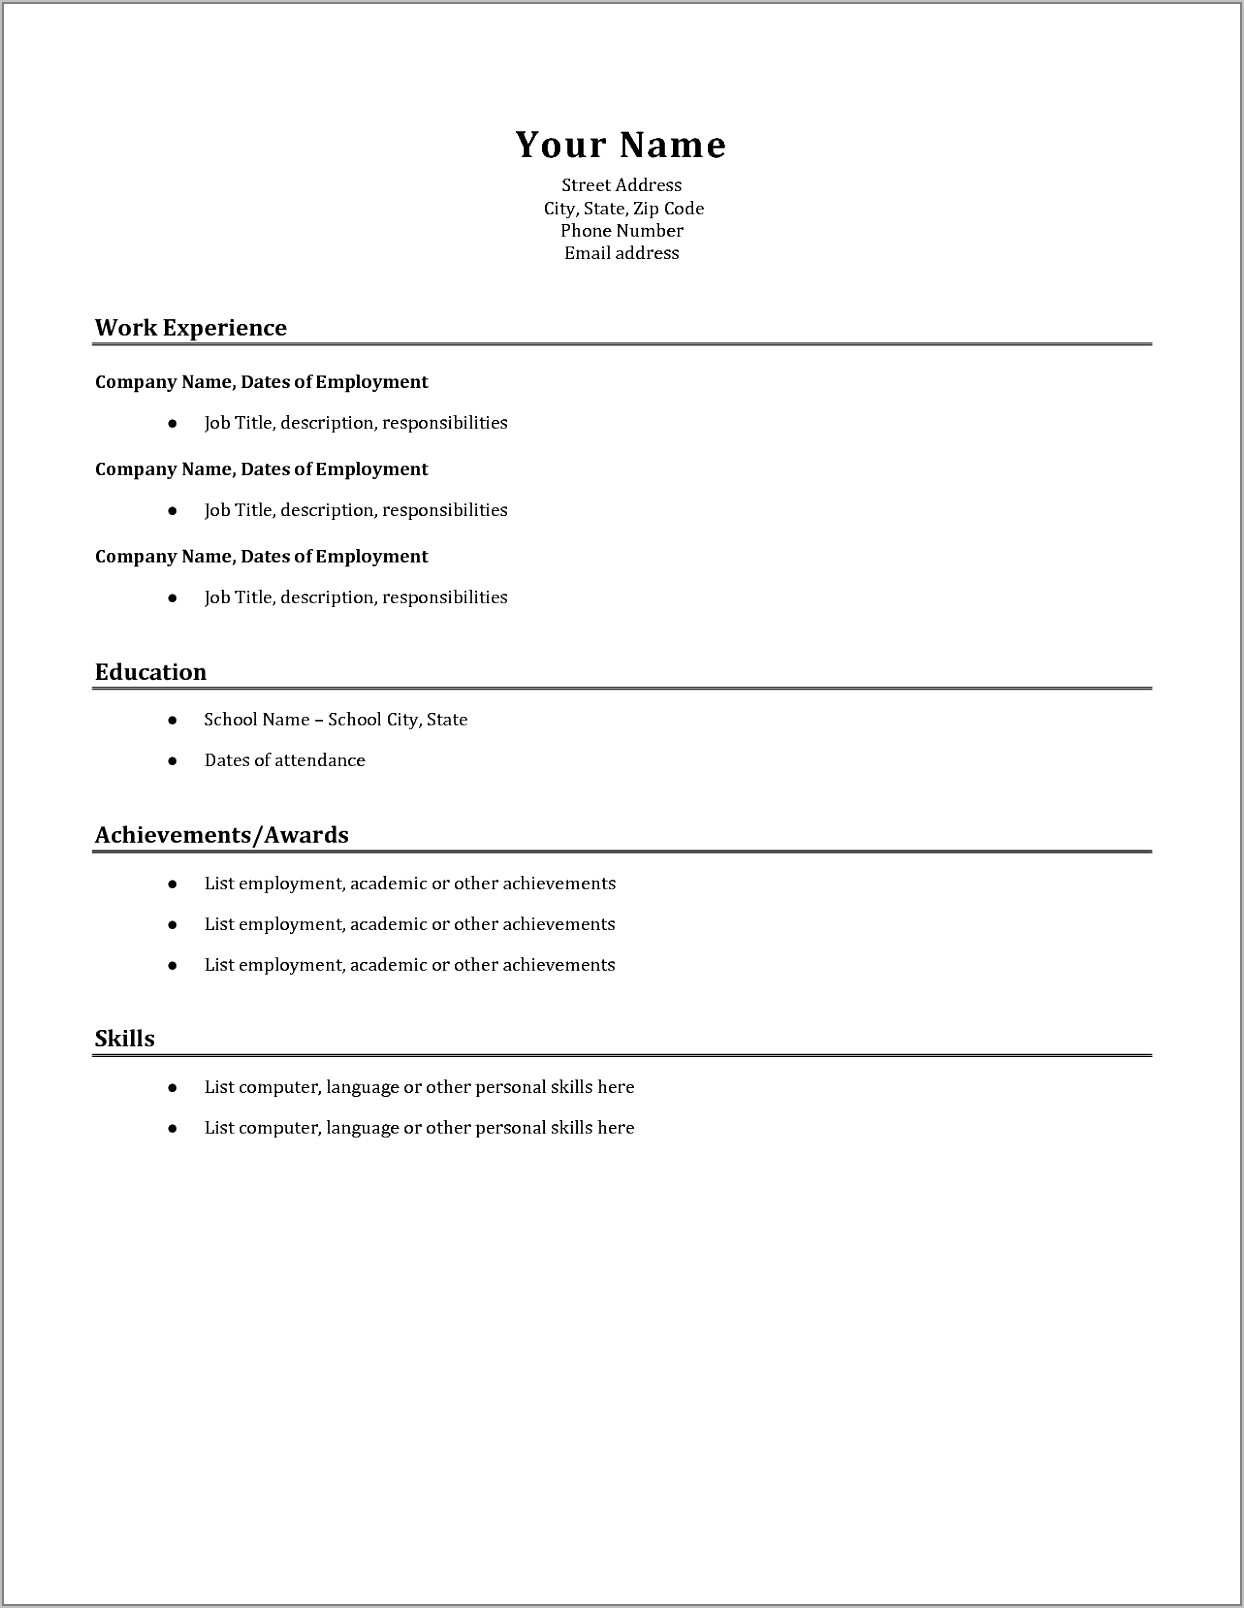 Resume For Cna Position With No Experience